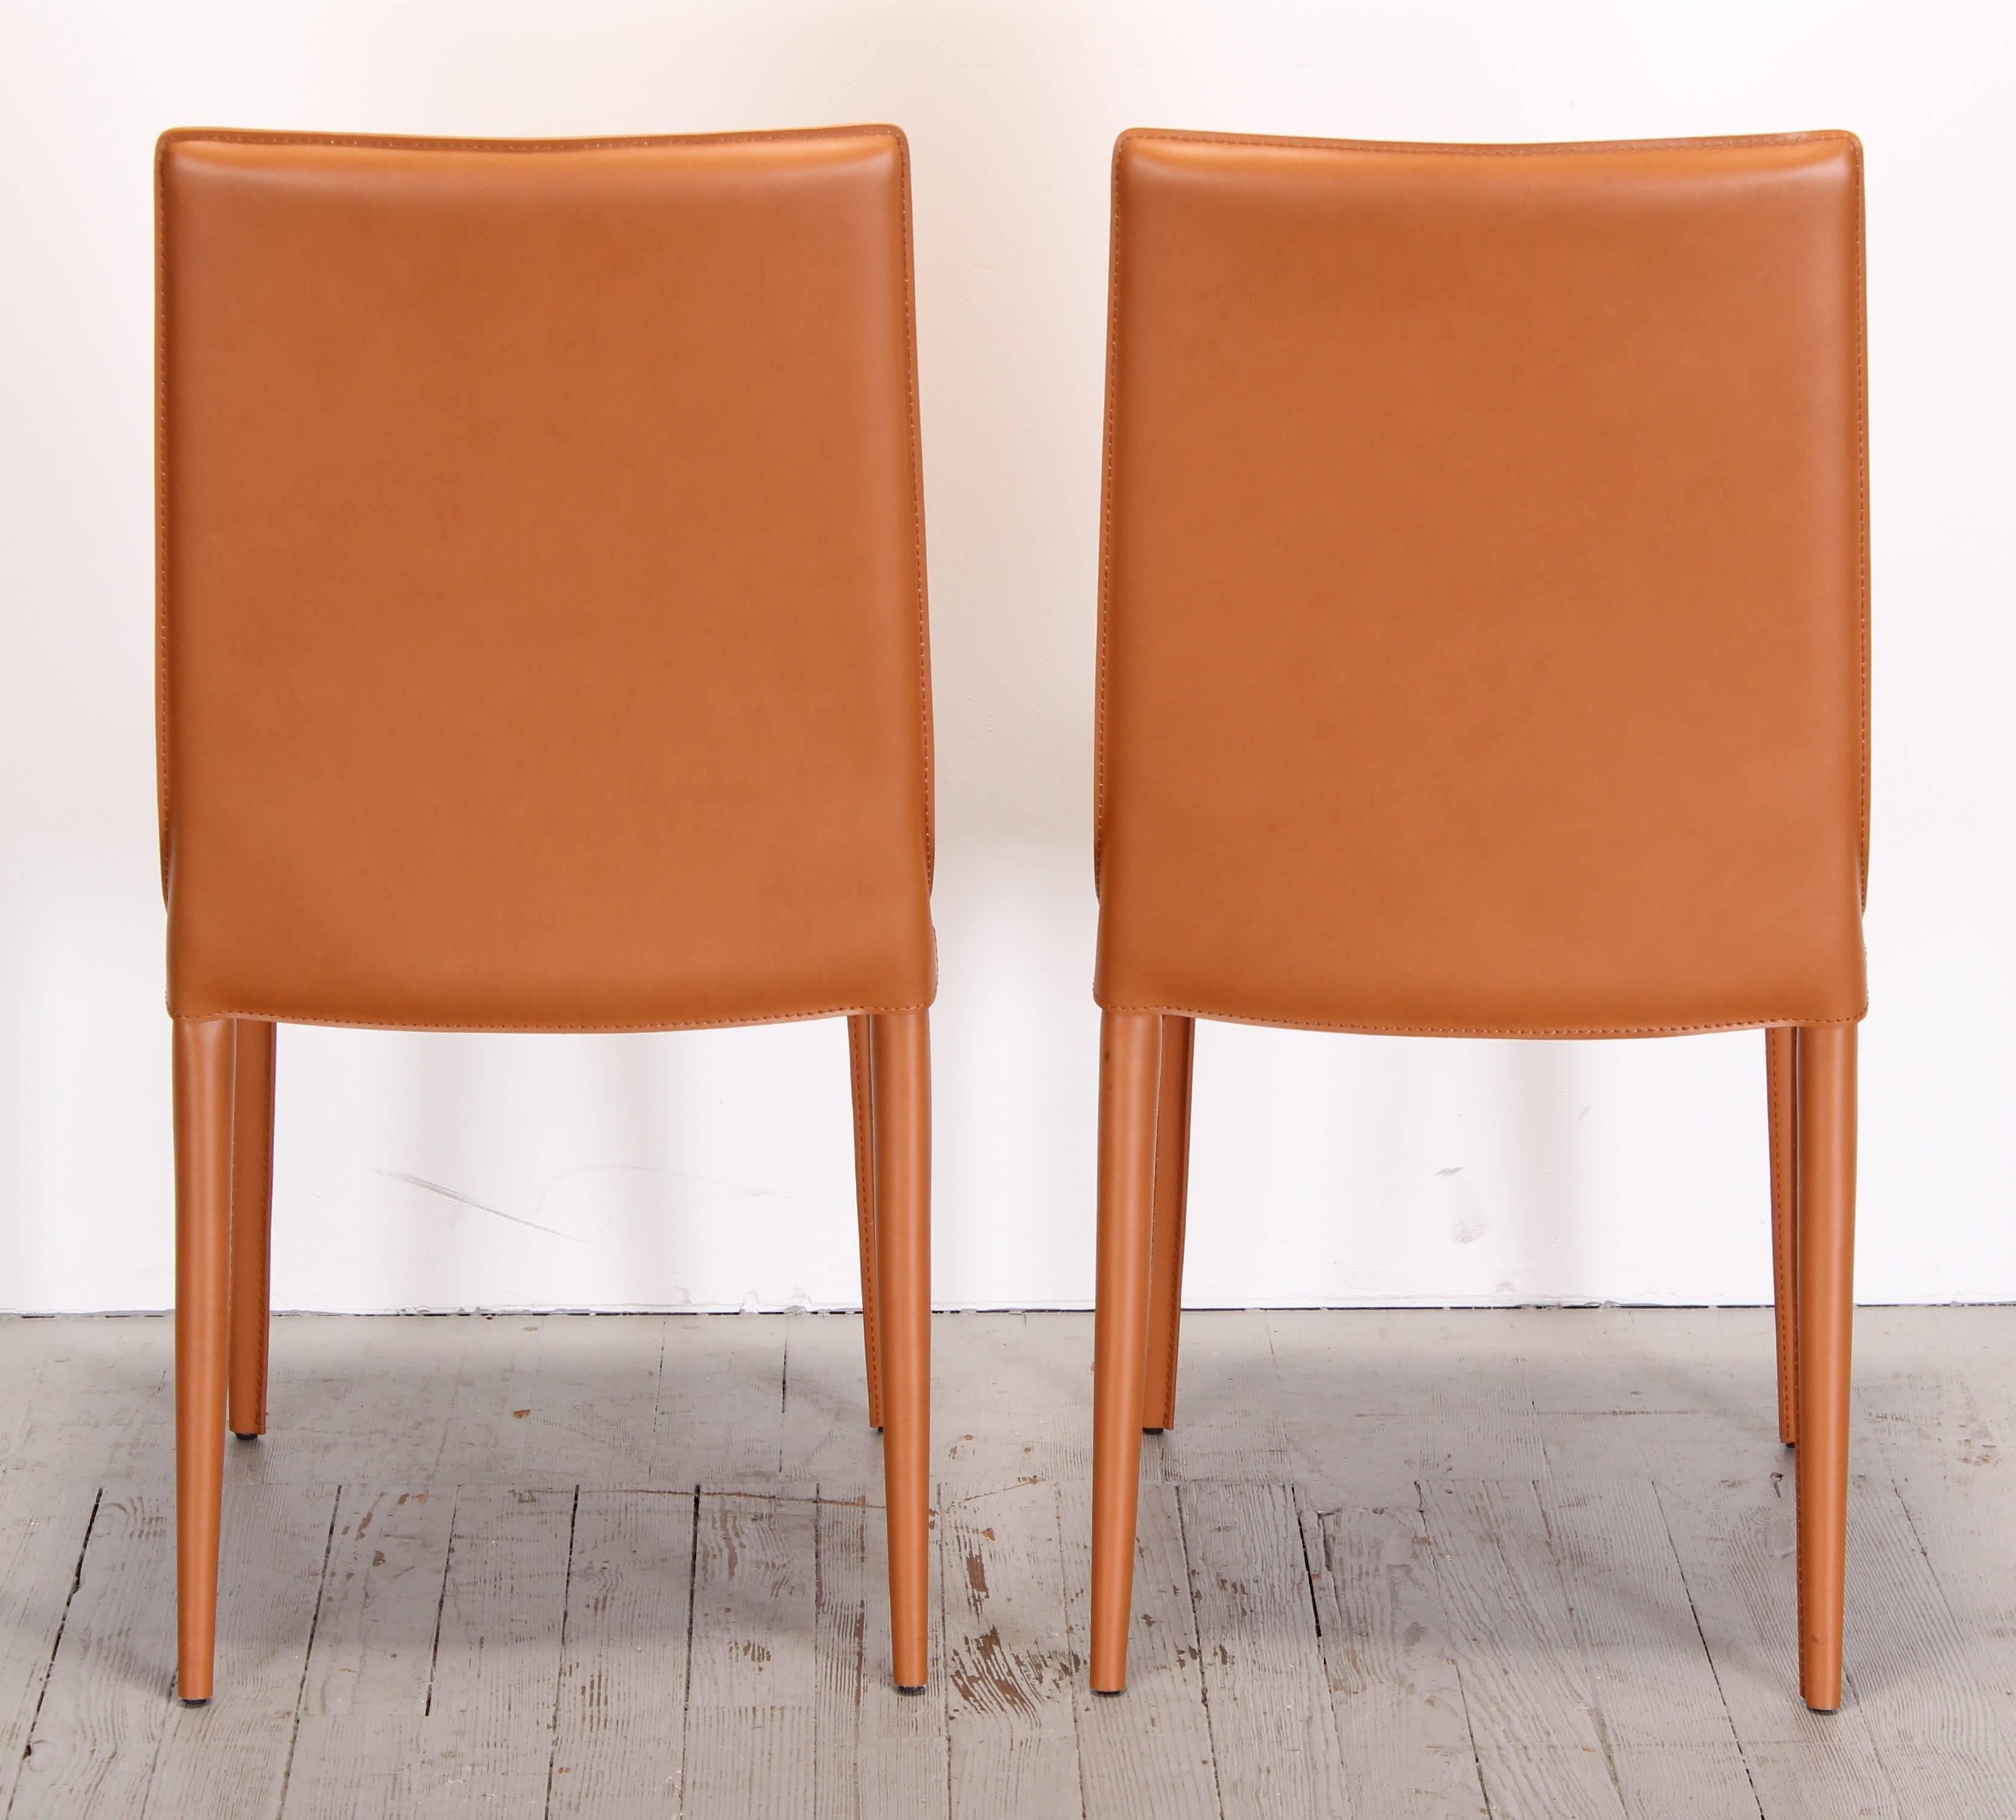 Italian Pair of Frag Pradamano Leather Side Chairs, 2000 1 Available 